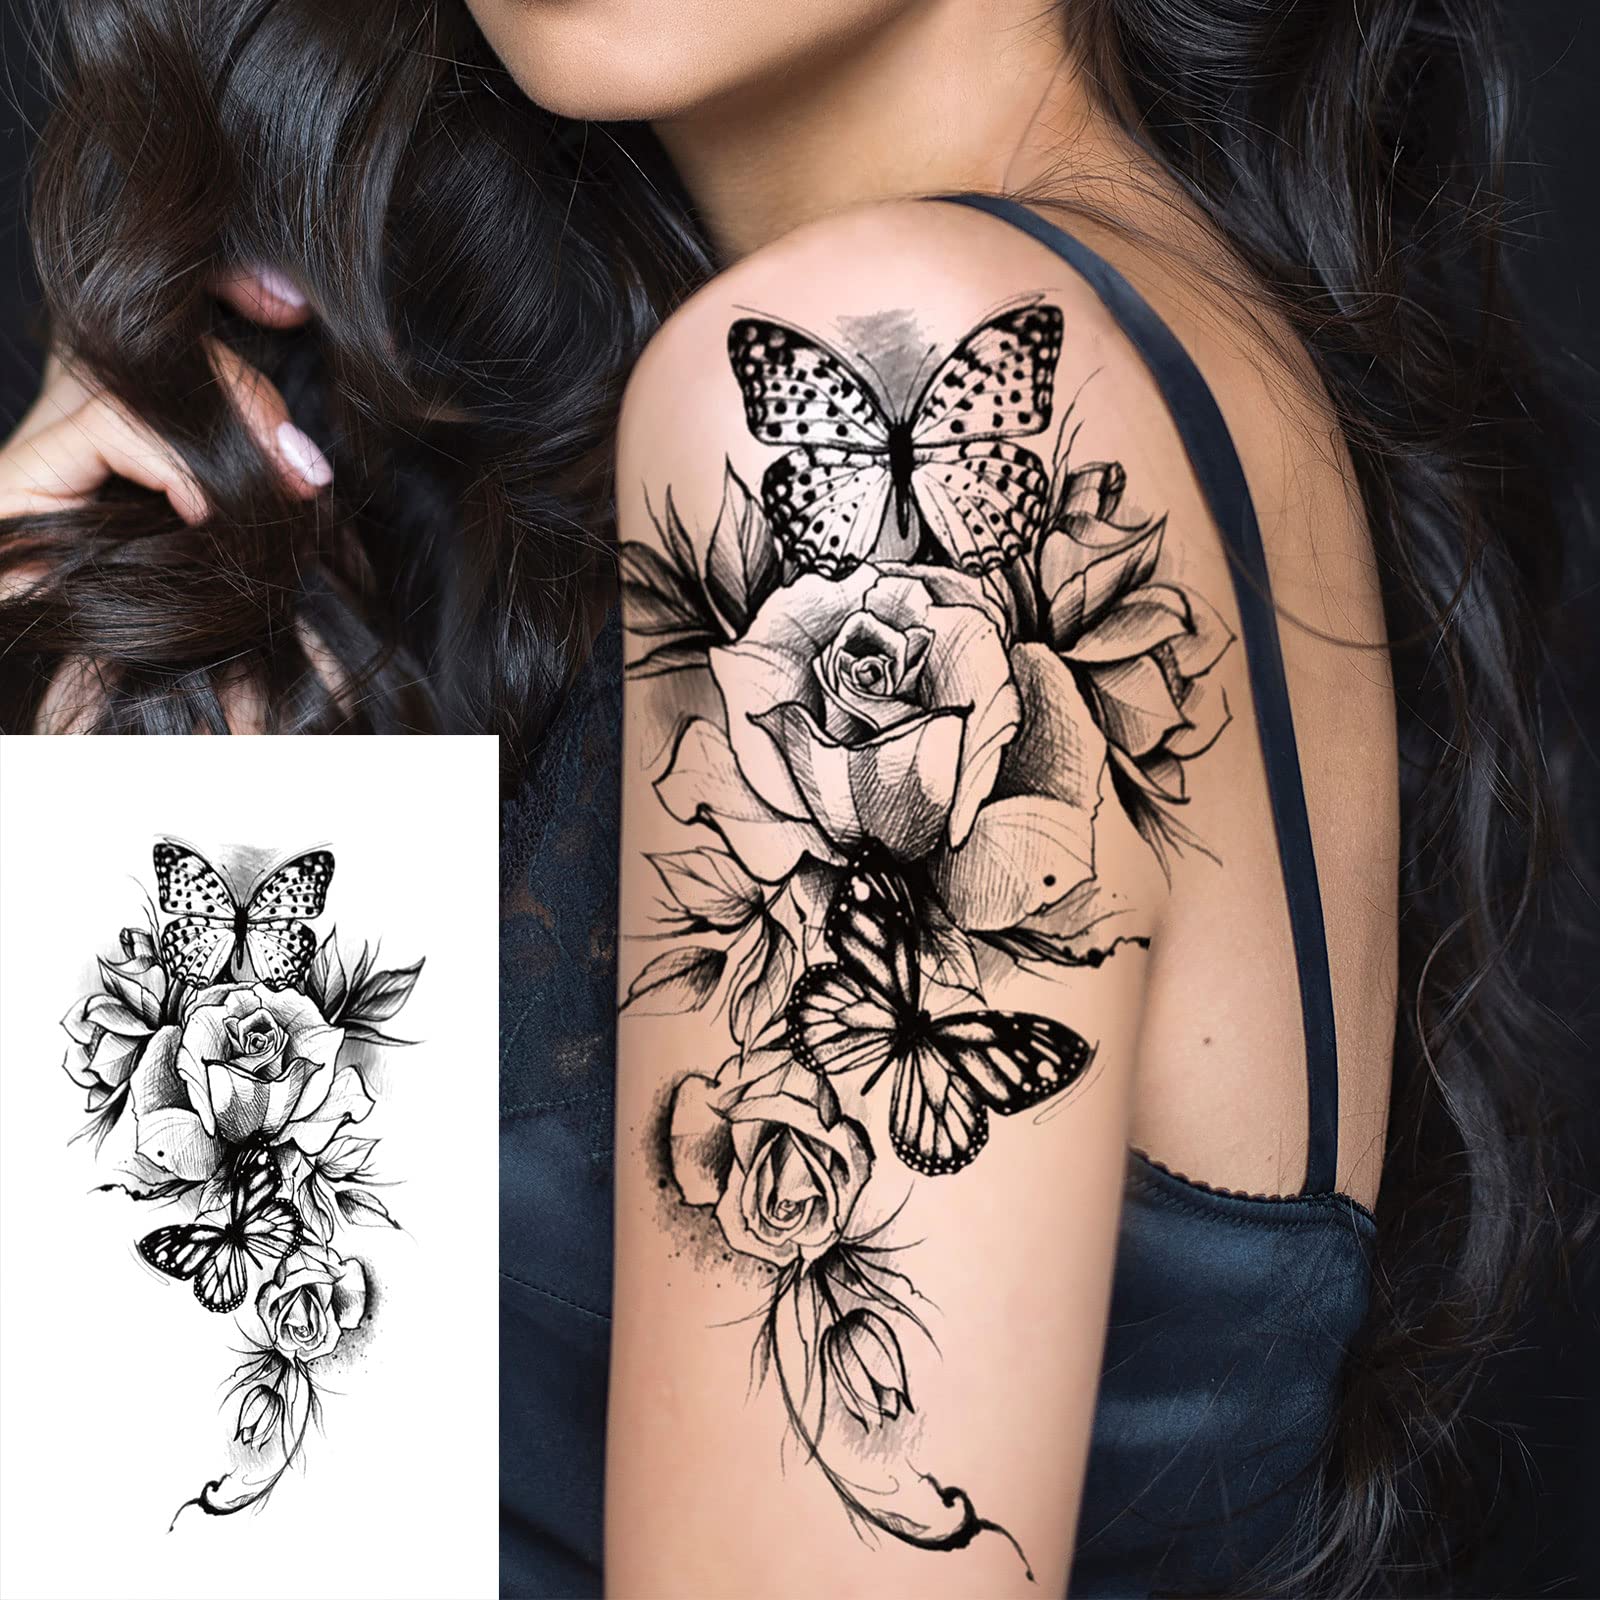 32pcs Black Rose Flower Temporary Tattoo Sticker For Women,Multiple Floral Pattern Designs(7.5X3.8 inch)